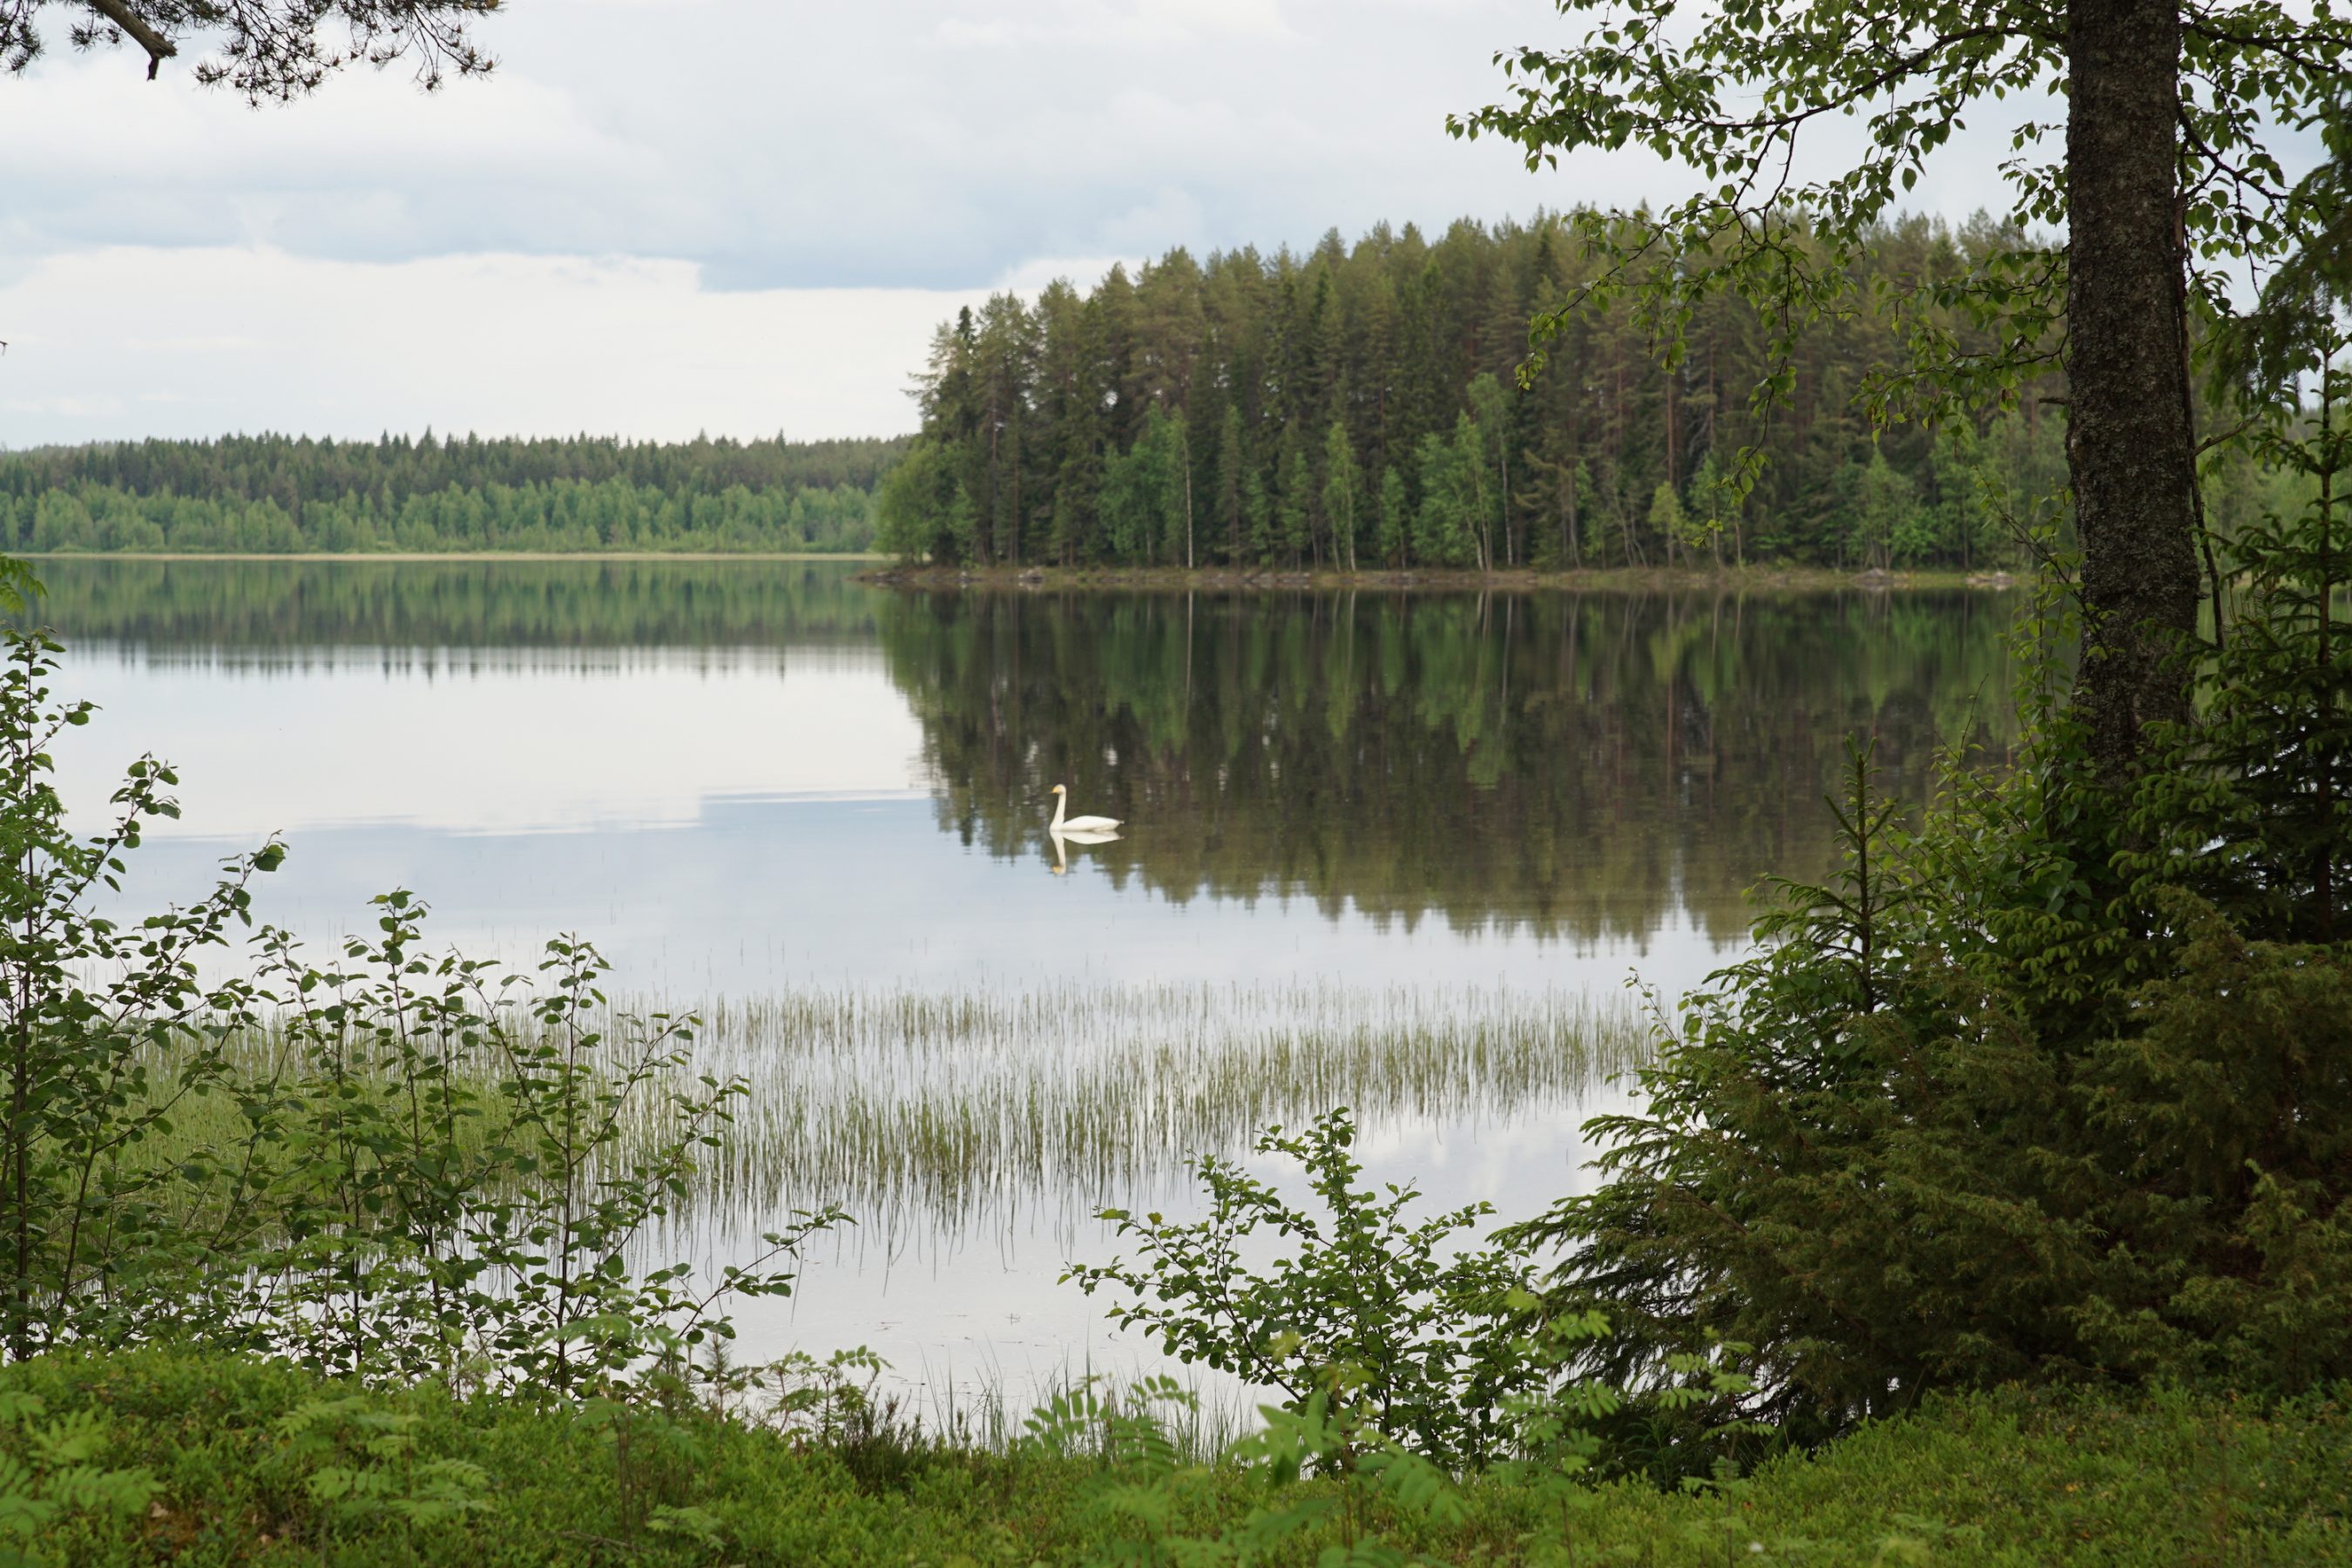 Lake seen from the sauna